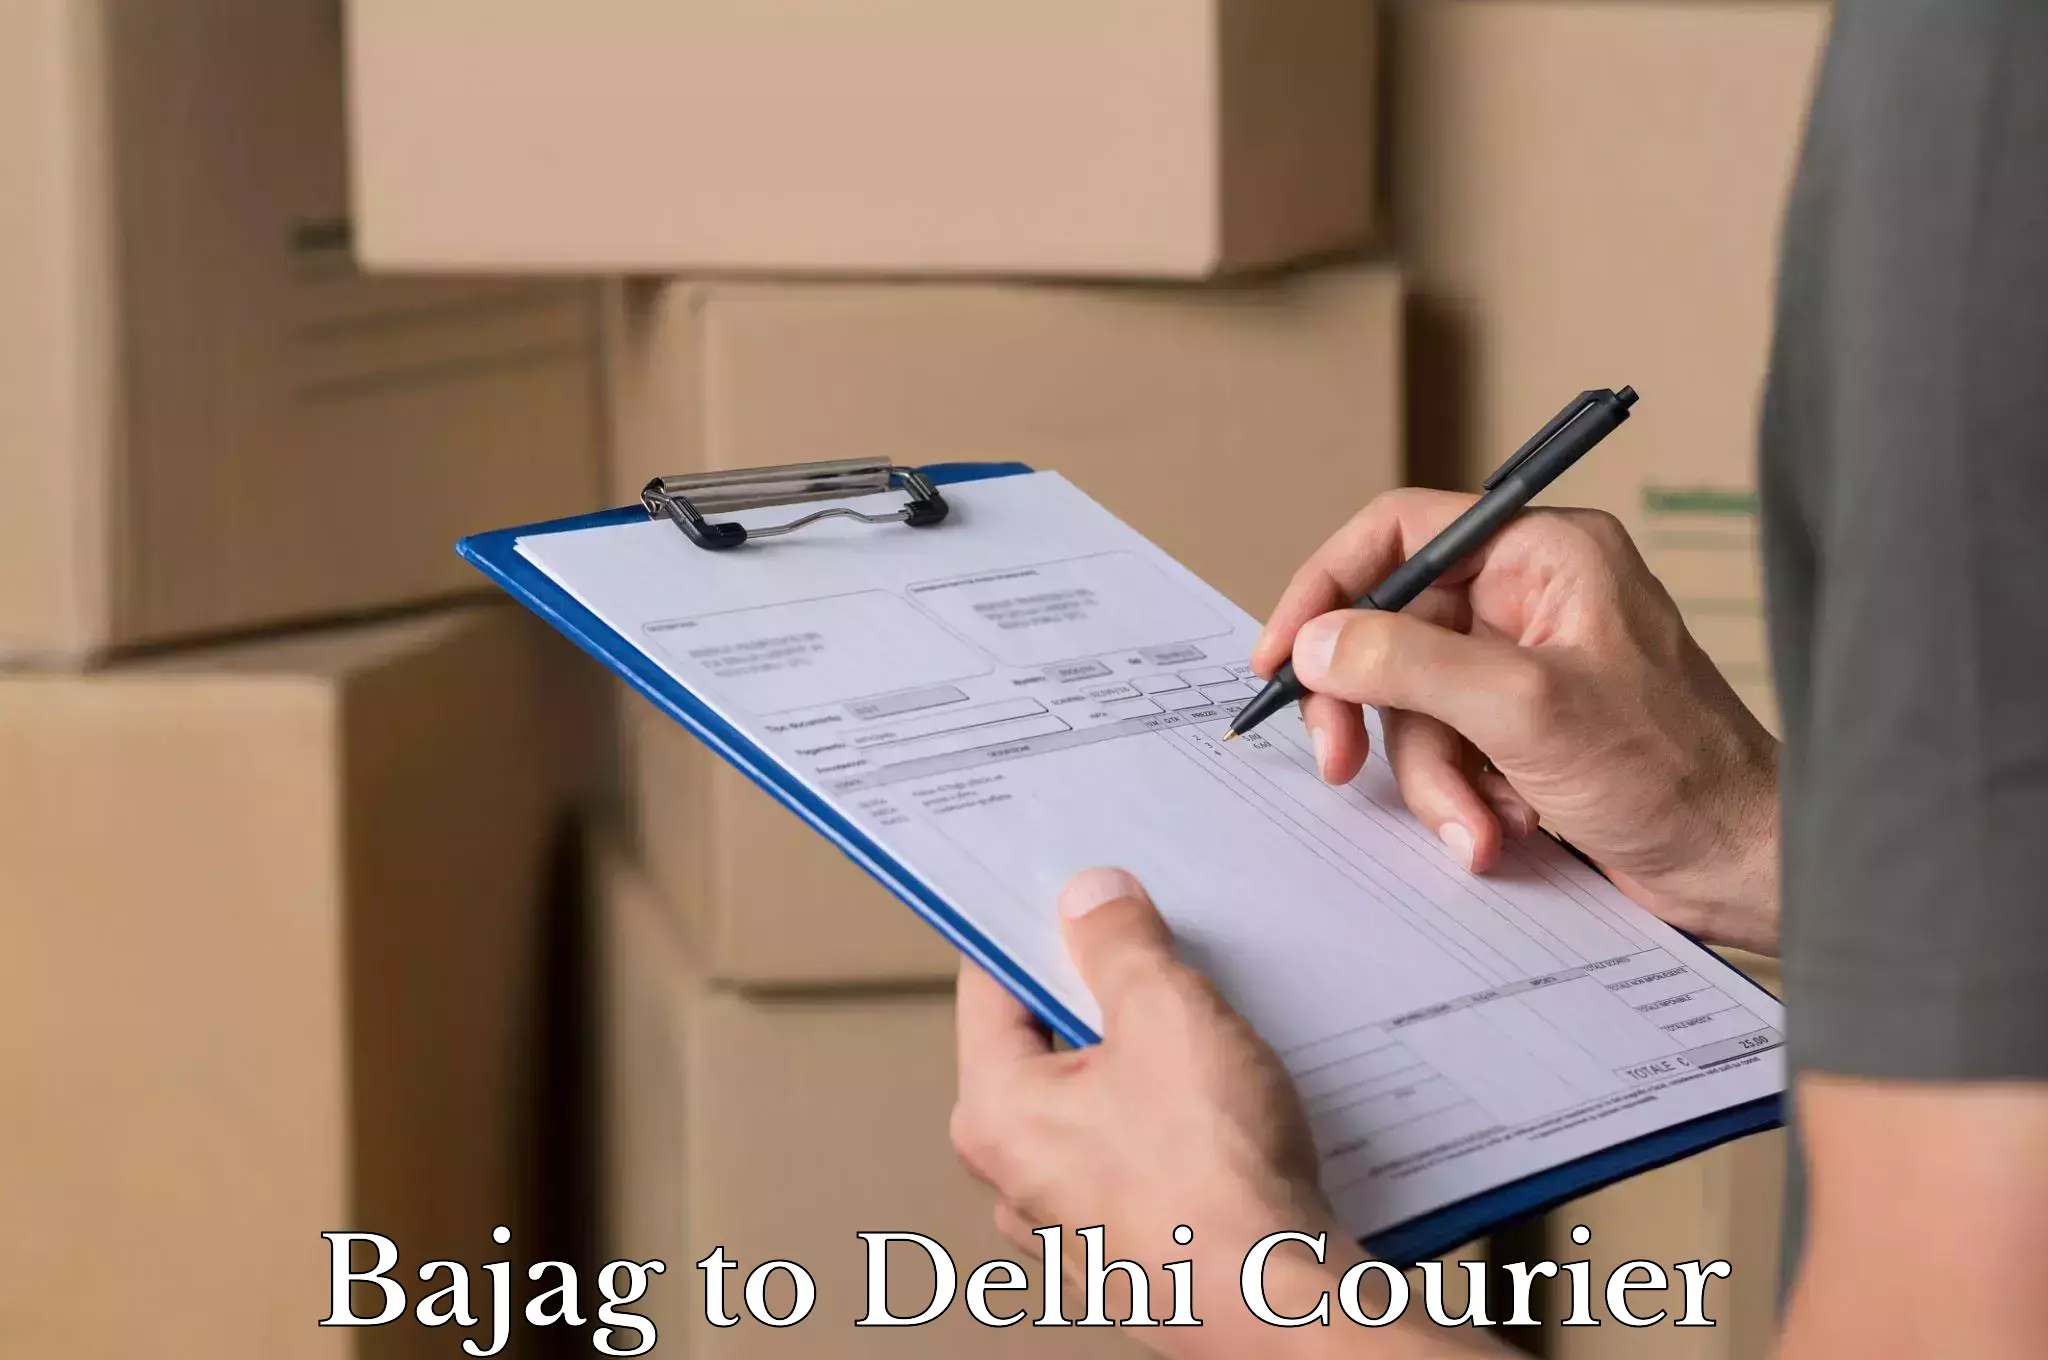 Baggage delivery scheduling Bajag to Delhi